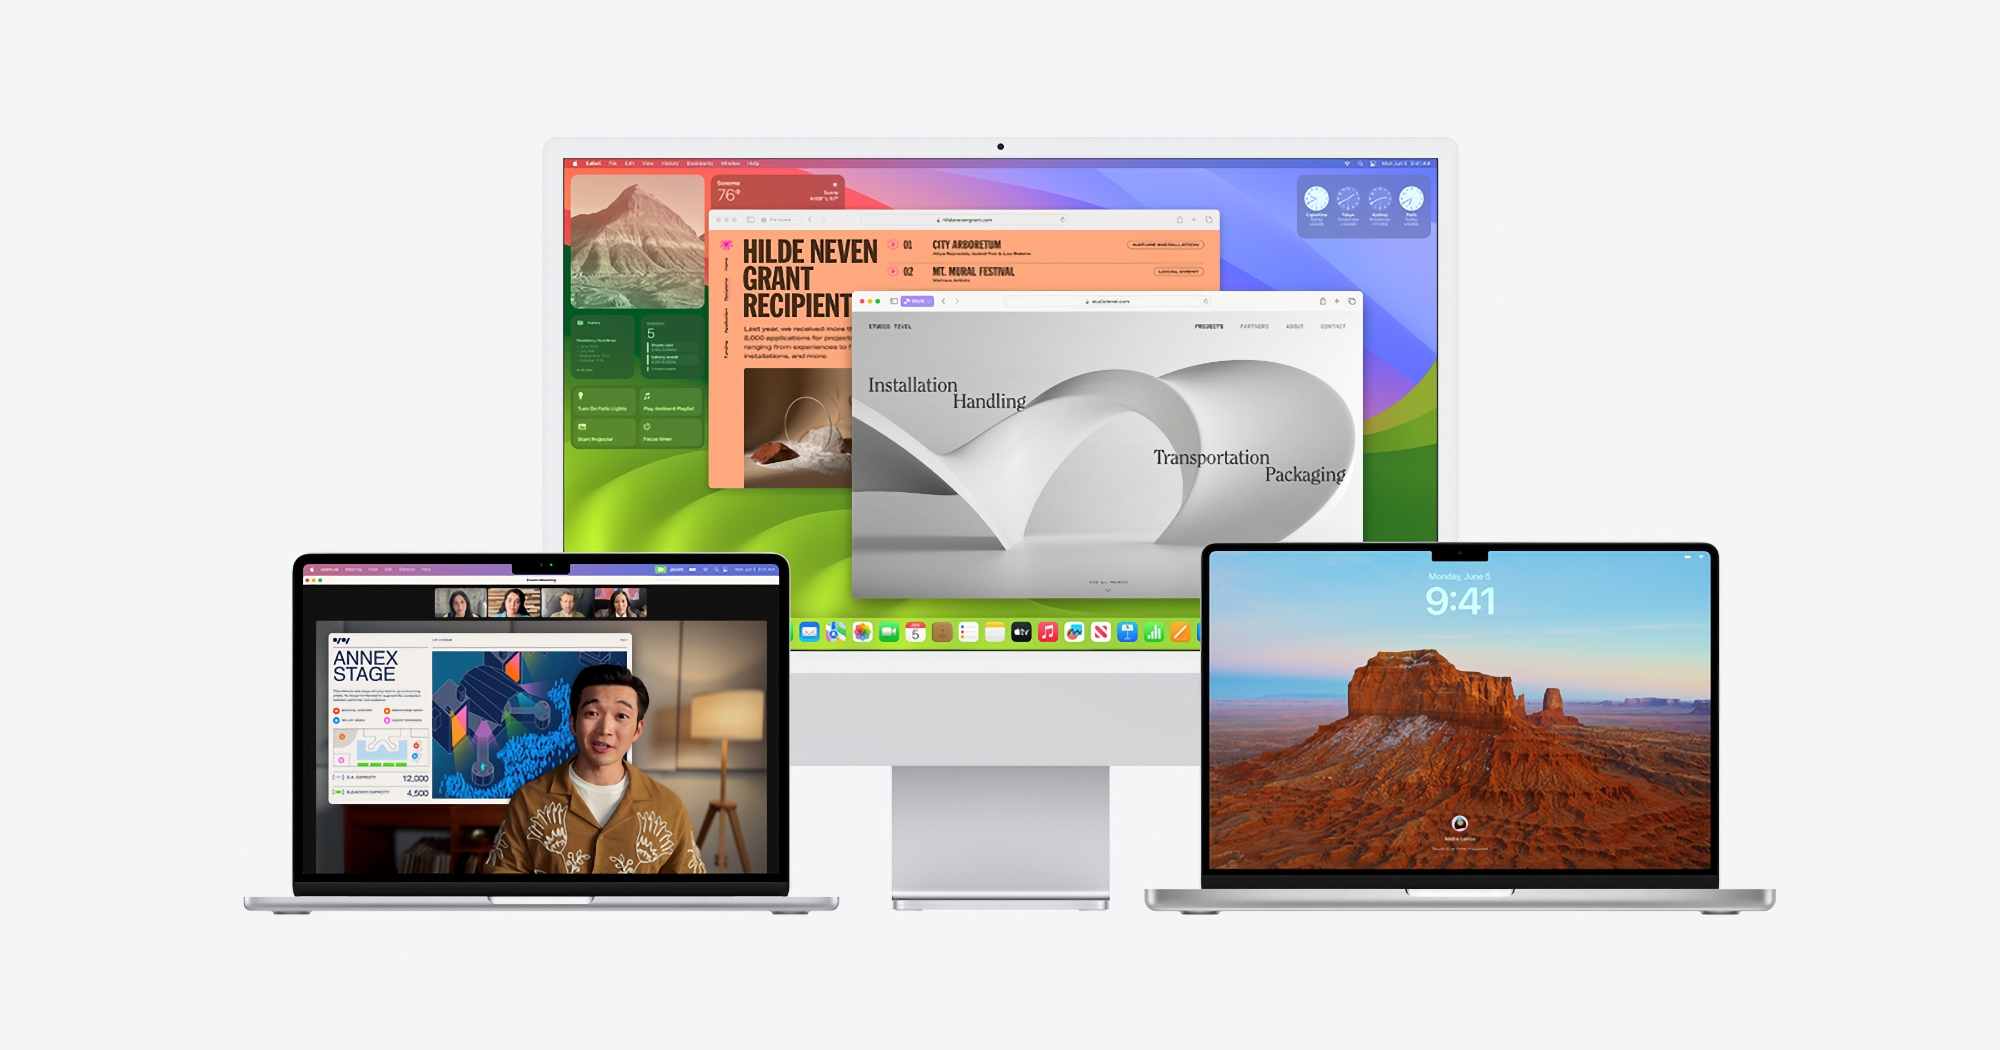 Apple has released the seventh beta version of macOS 14 Sonoma